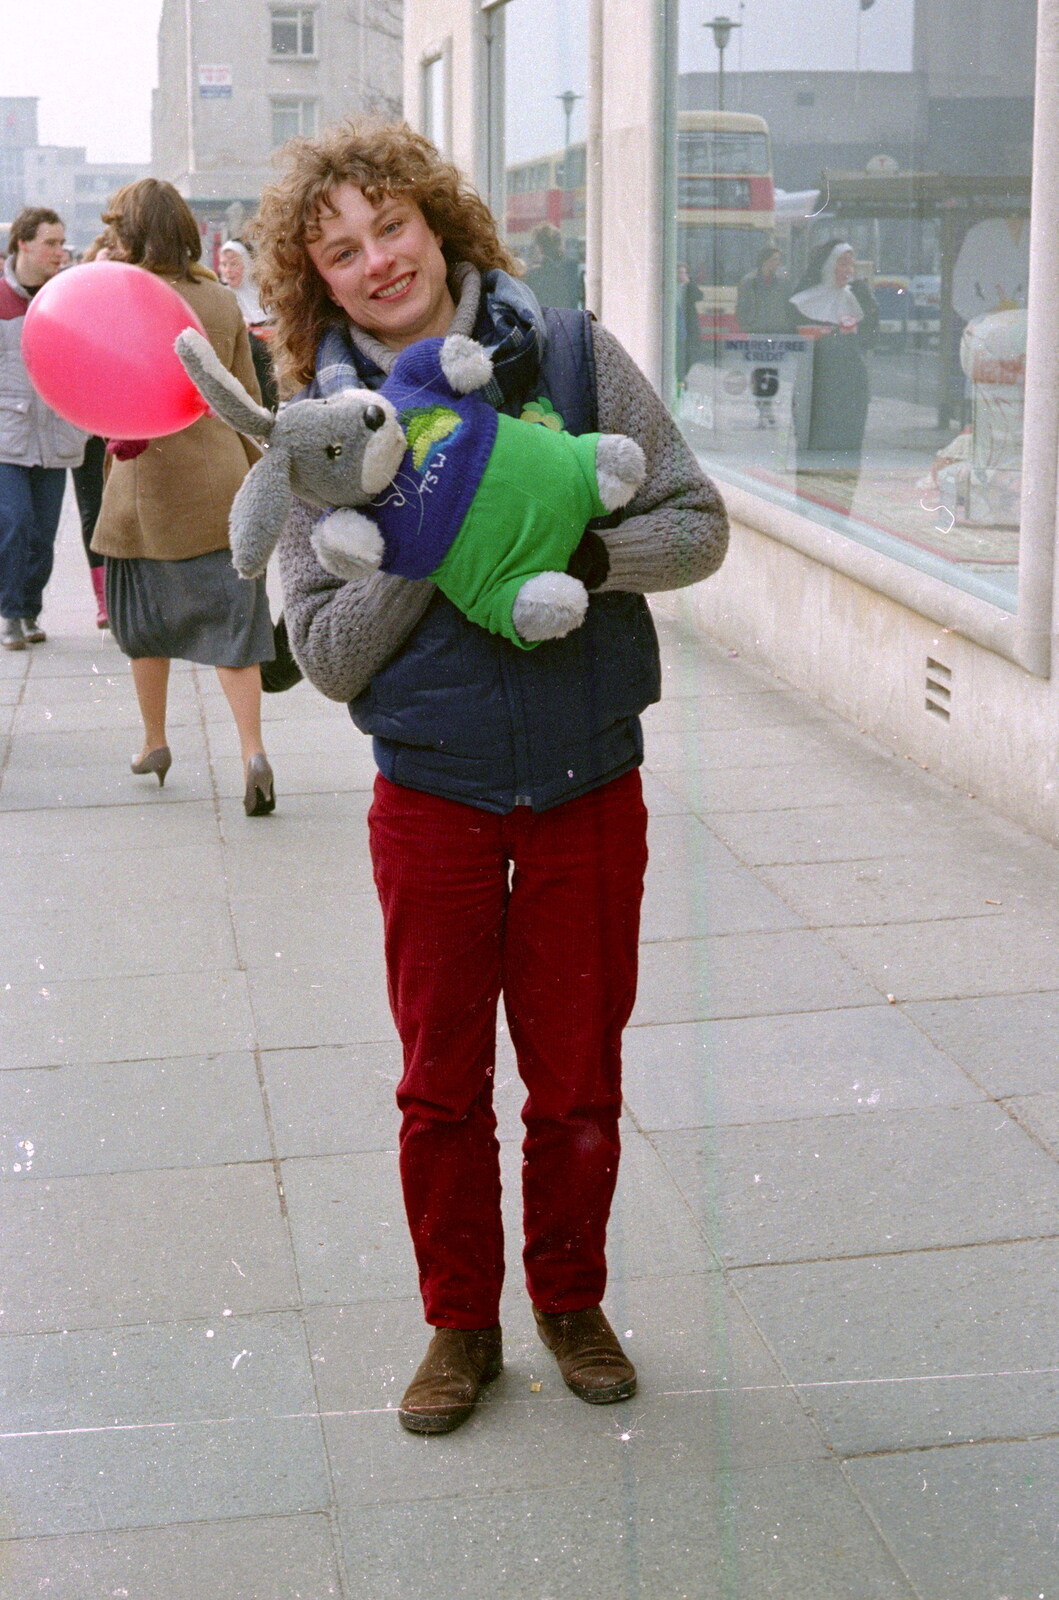 Gus on the streets from Uni: PPSU "Jazz" RAG Street Parade, Plymouth, Devon - 17th February 1986